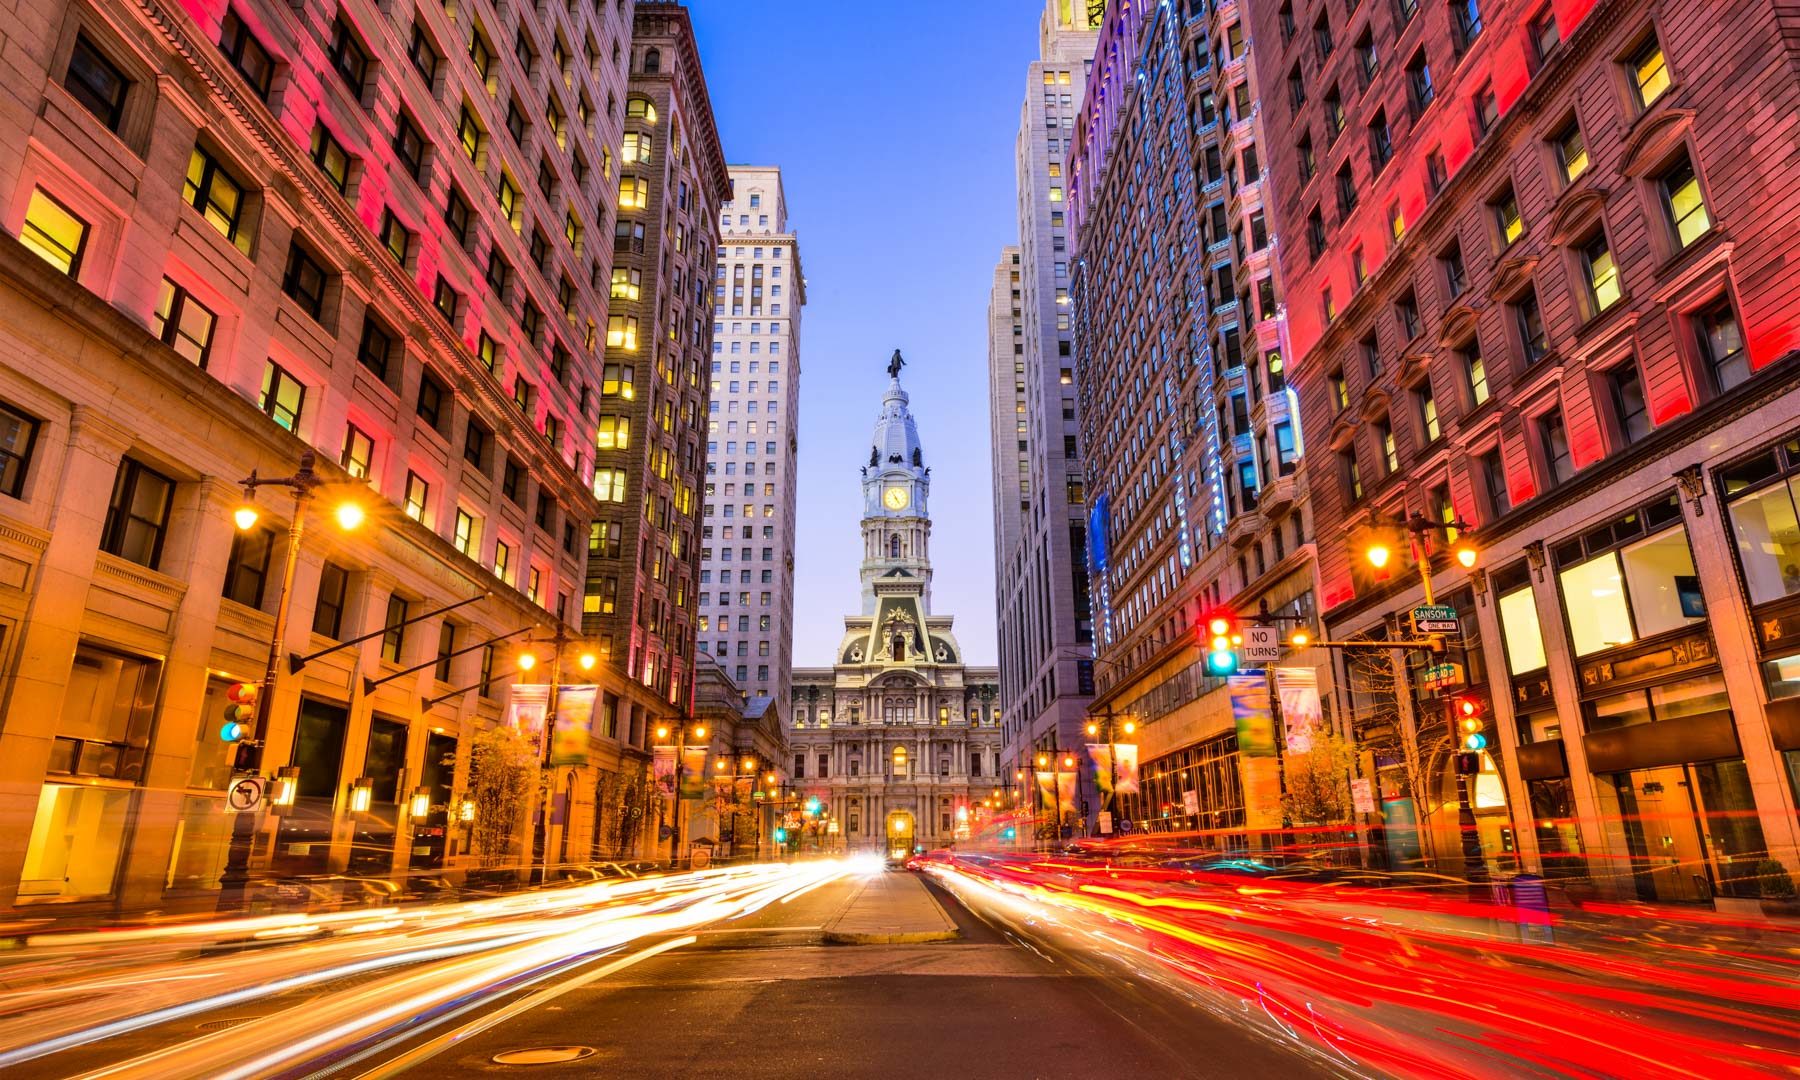 The Best Things to do in Philadelphia